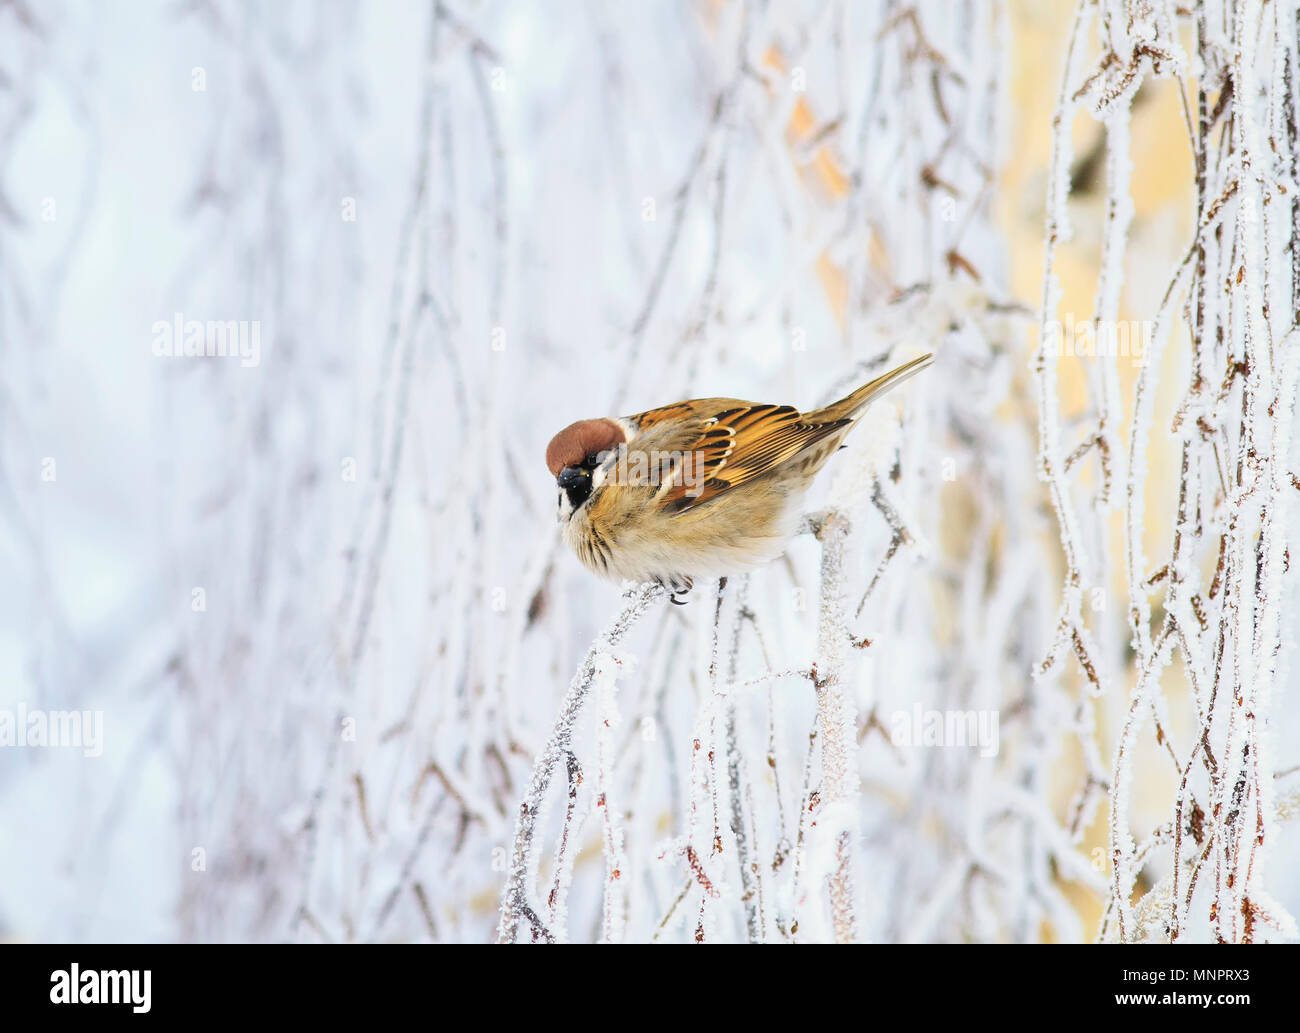 beautiful little bird Sparrow sitting in winter Park on birch branches with fluffy white frosting and snowflakes Stock Photo